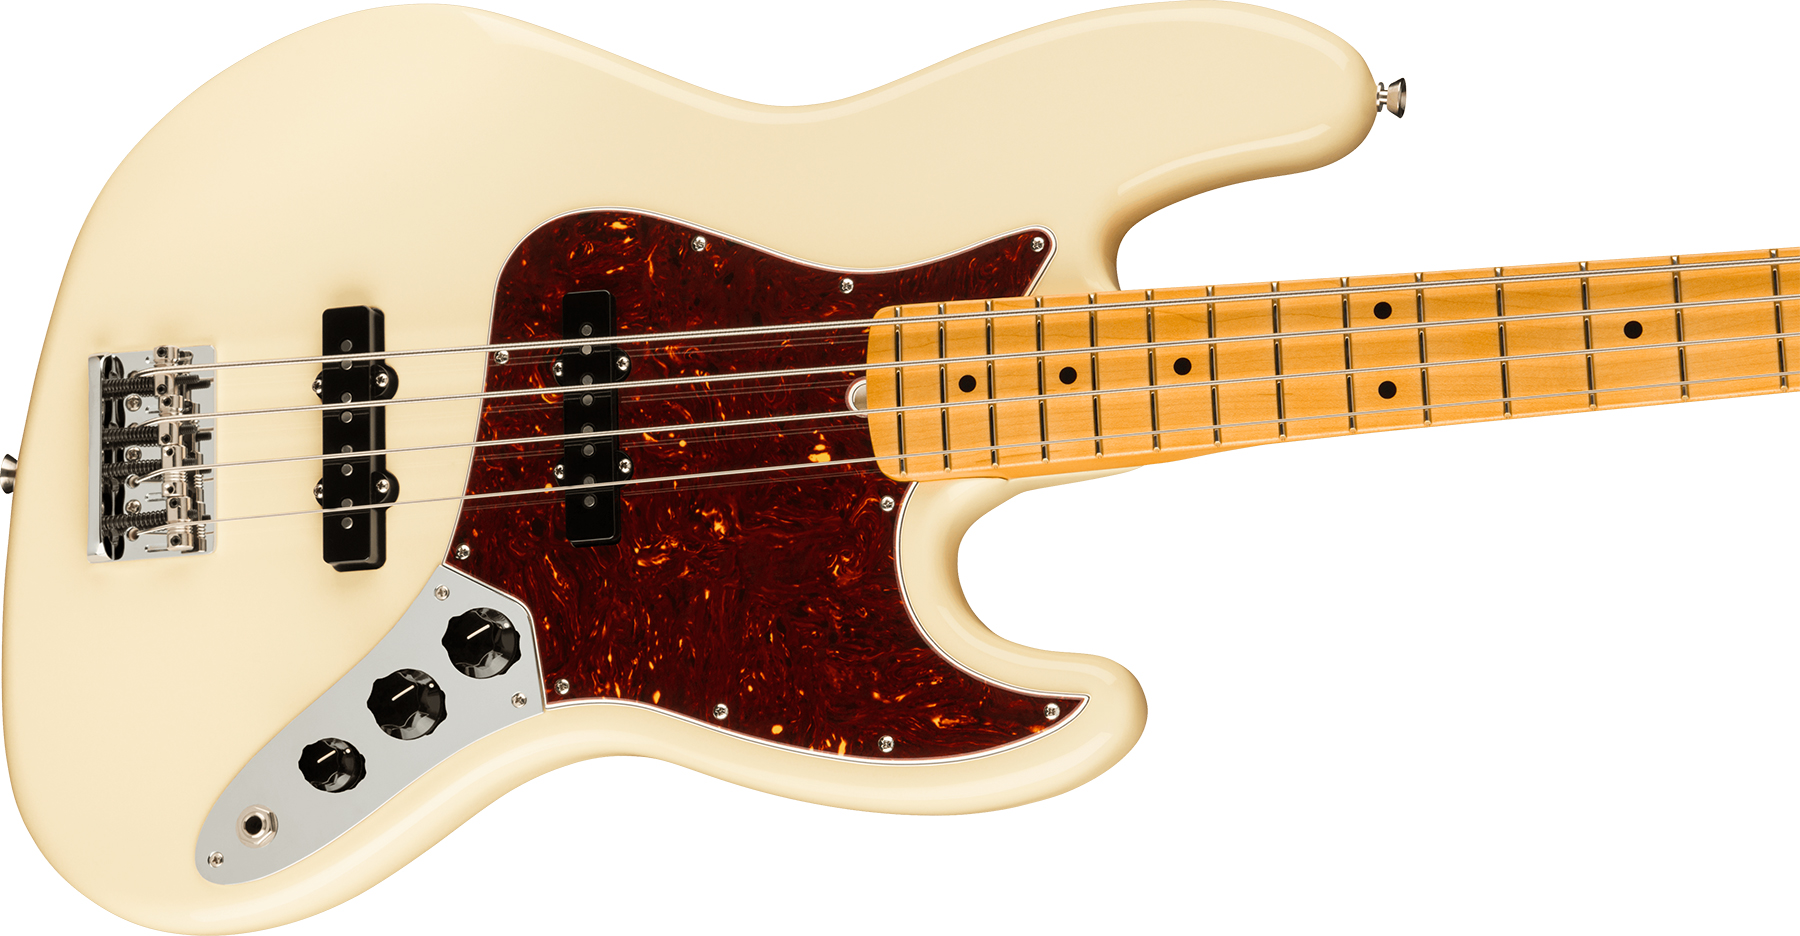 Fender Jazz Bass American Professional Ii Usa Mn - Olympic White - Solidbody E-bass - Variation 3